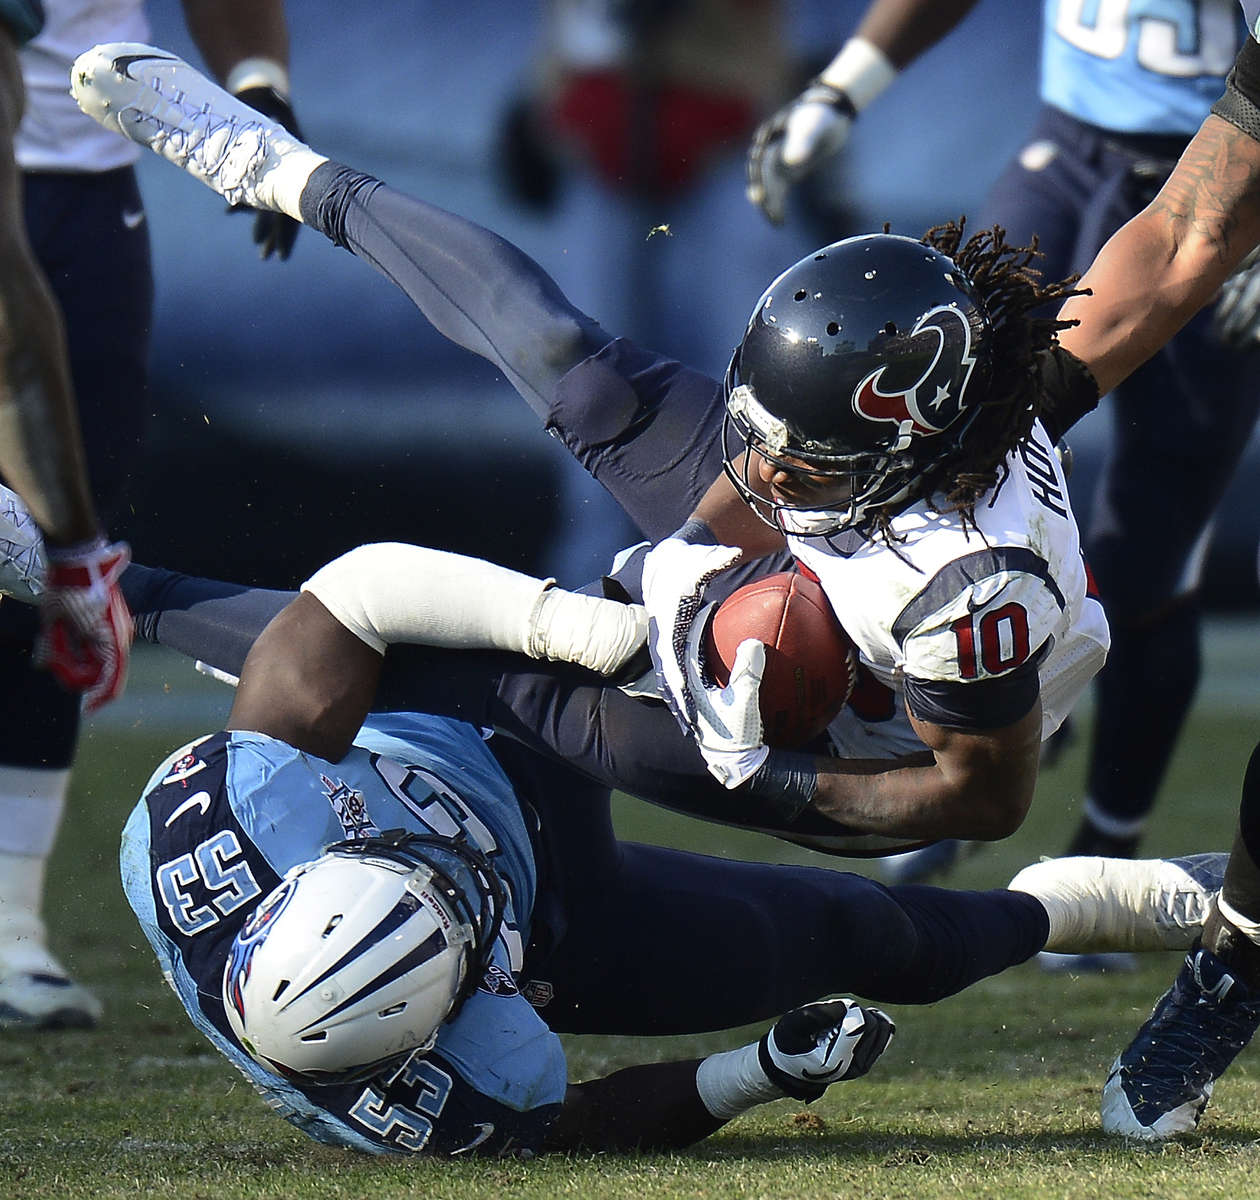 Houston Texans wide receiver DeAndre Hopkinsis brought down by Tennessee Titans linebacker Moise Fokou in the fourth quarter of an NFL football game on Dec. 29, 2013, in Nashville, Tenn. (AP Photo/ Mark Zaleski)